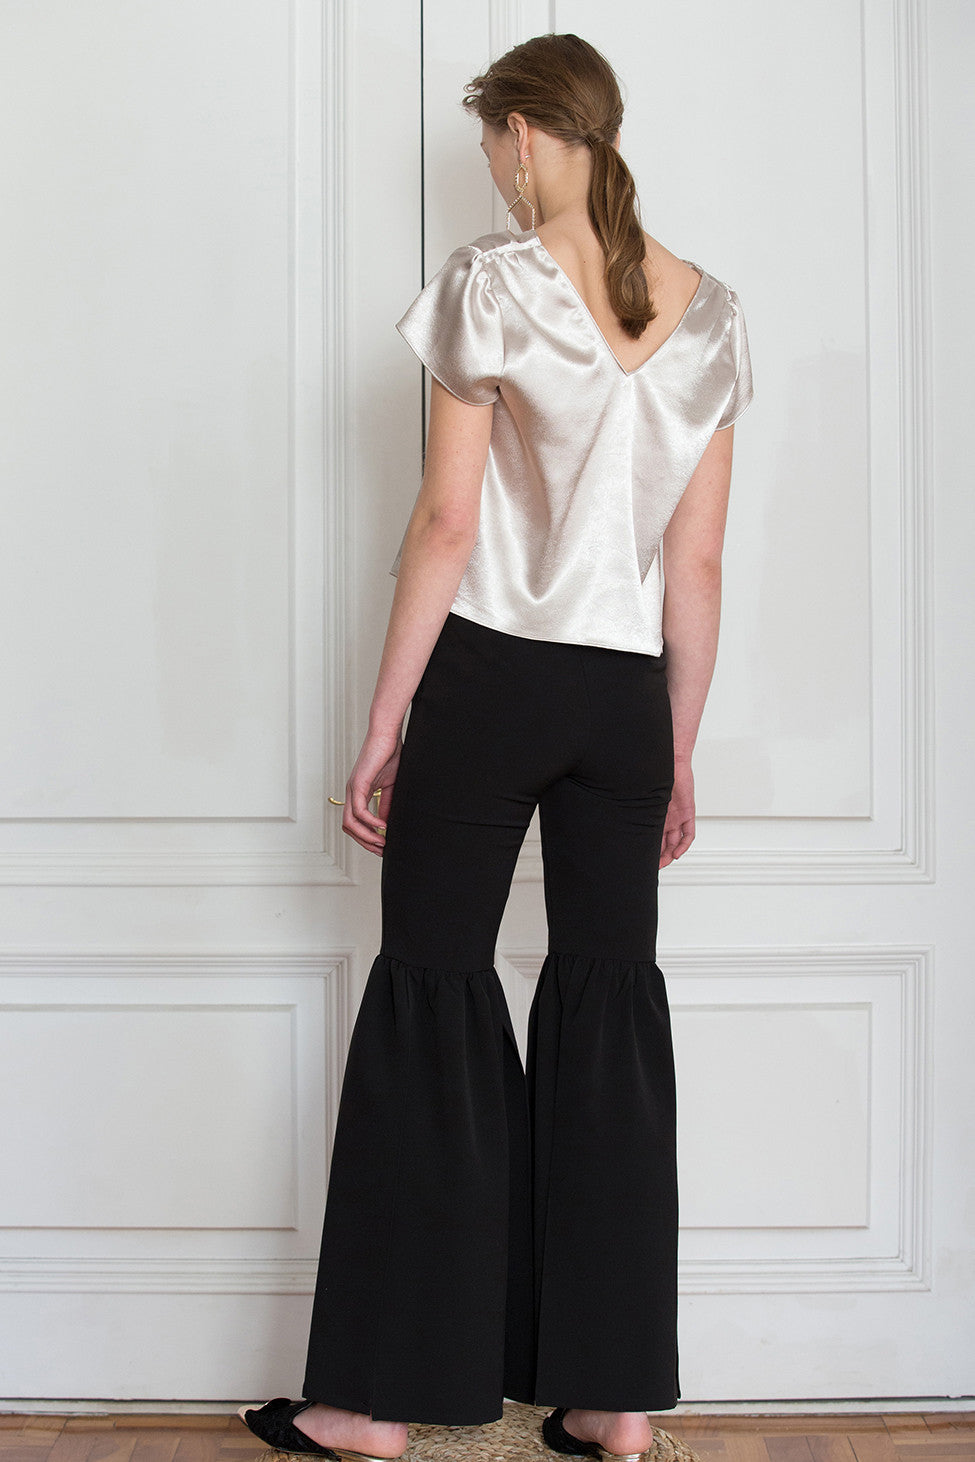 The Cheysa Pant in Black featuring peplum leg trouser, gently flare out hem with side slits. Slim-fitting at thigh. High rise. Centre-front concealed zip fly and hook closure.